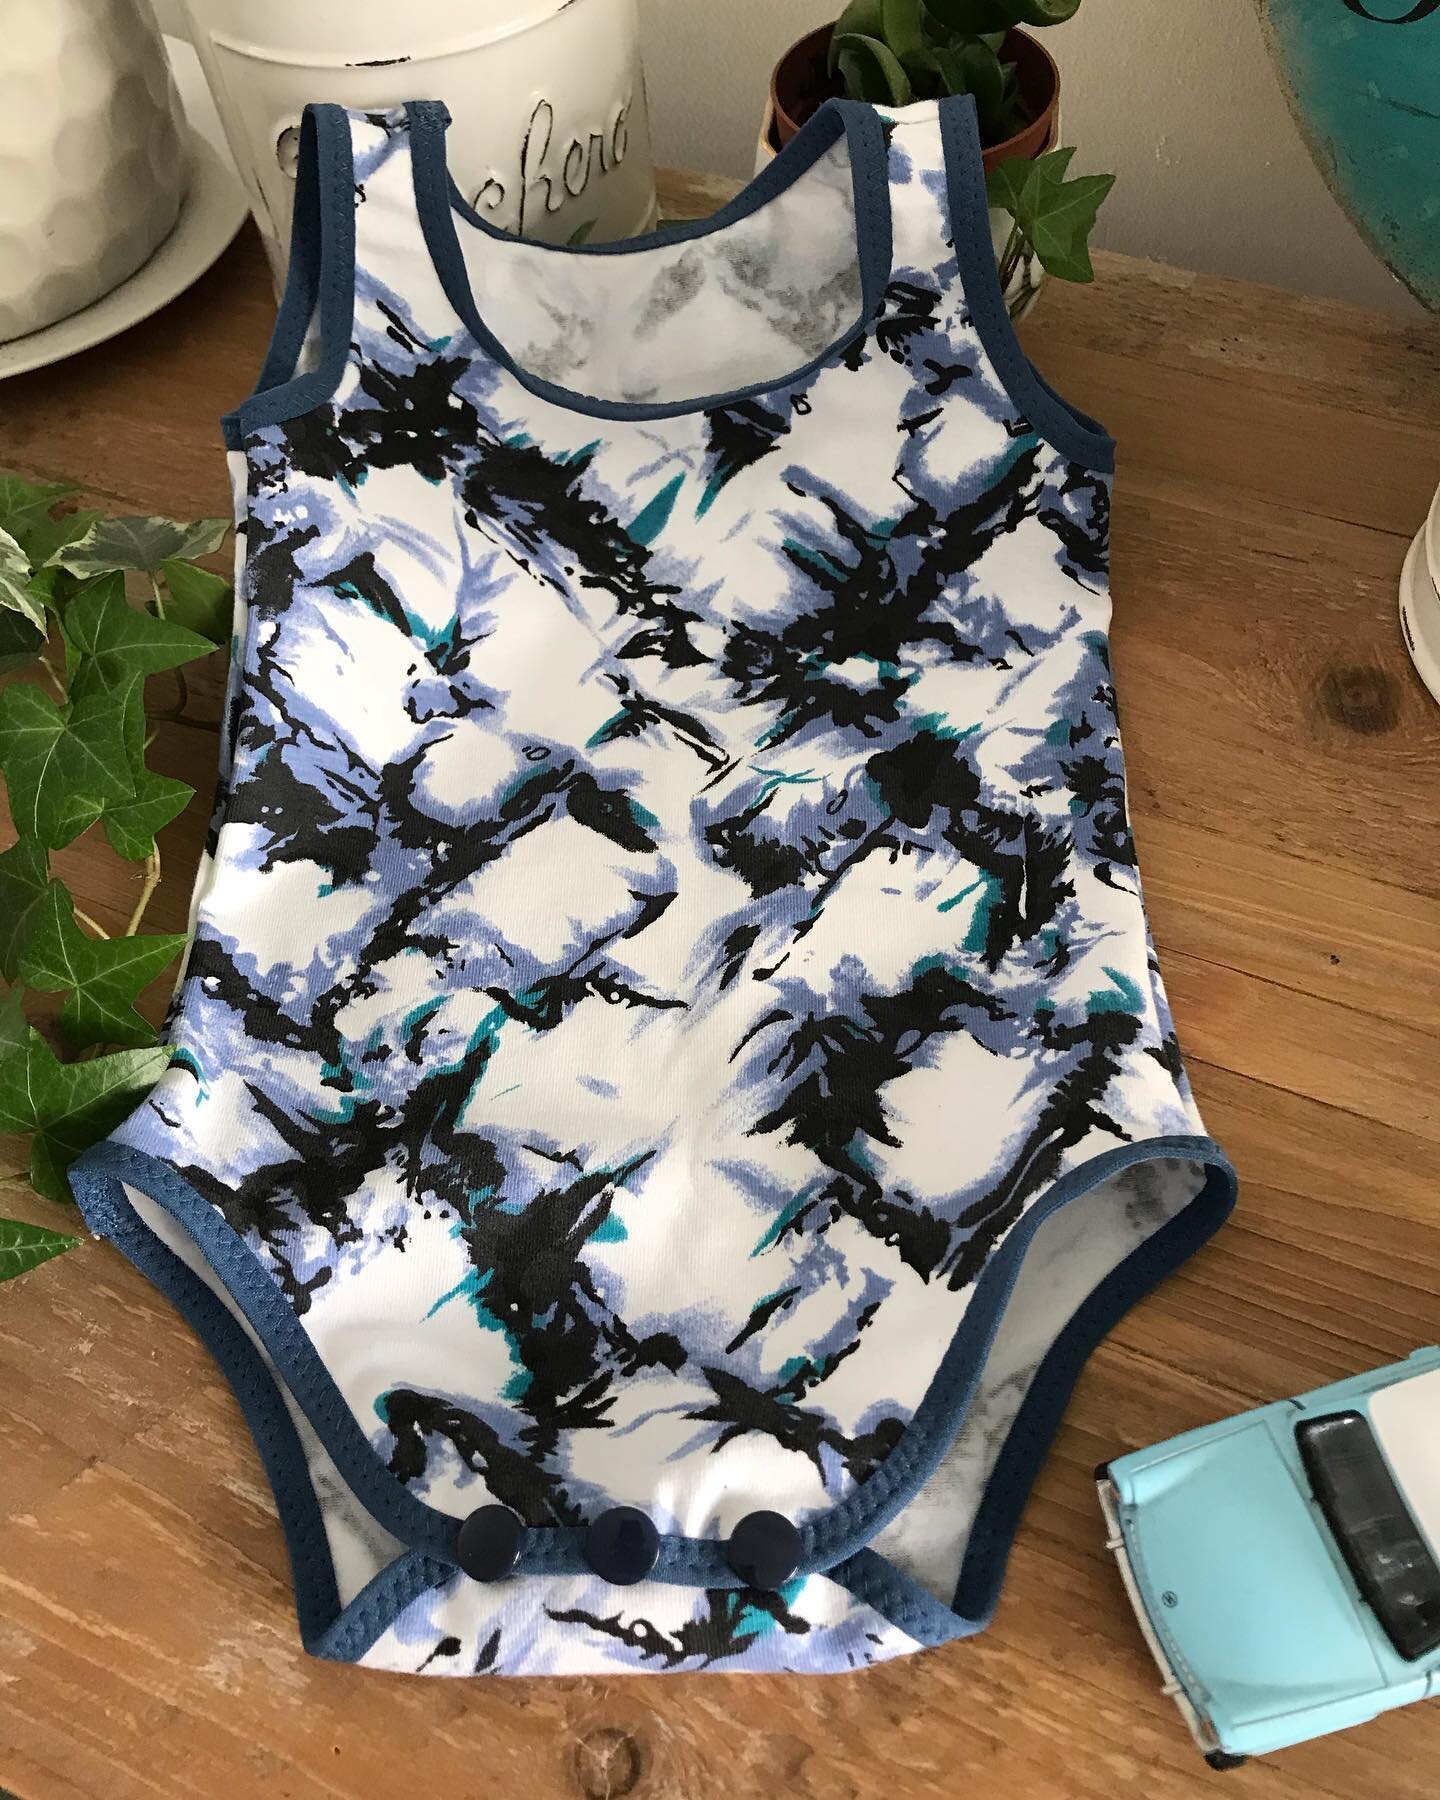 I finally found time to use this beautiful blue camouflage fabric. Limited stock only as I couldn&rsquo;t get much fabric of this. 

#baby #gift #babyshower #blue #camouflage #onesie #toddler #sewing #handmade #madewithlove #madebyme #cotton #natural